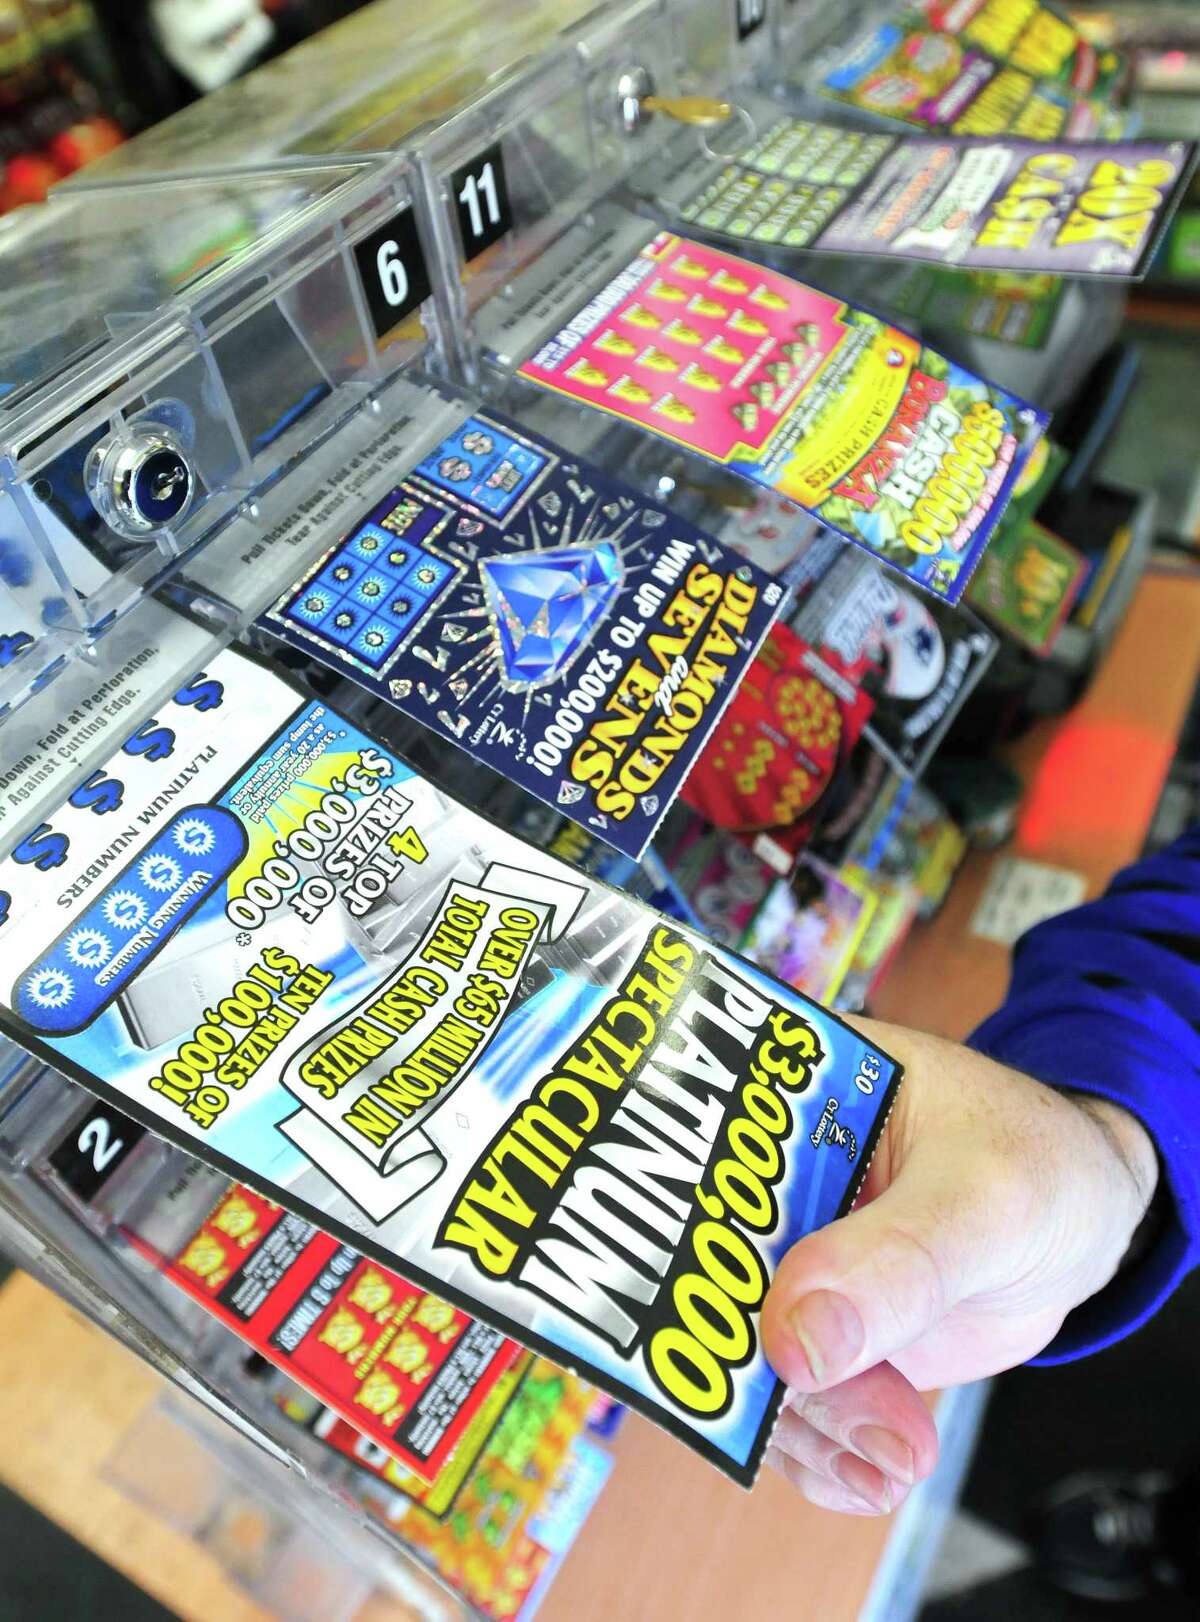 Instant lottery tickets for sale are photographed at Gerry's Shell Foodmart in New Haven in January 2011. Since Monday, 30 people have claimed a prize of $10,000 or more after buying lottery tickets from retailers across the state.